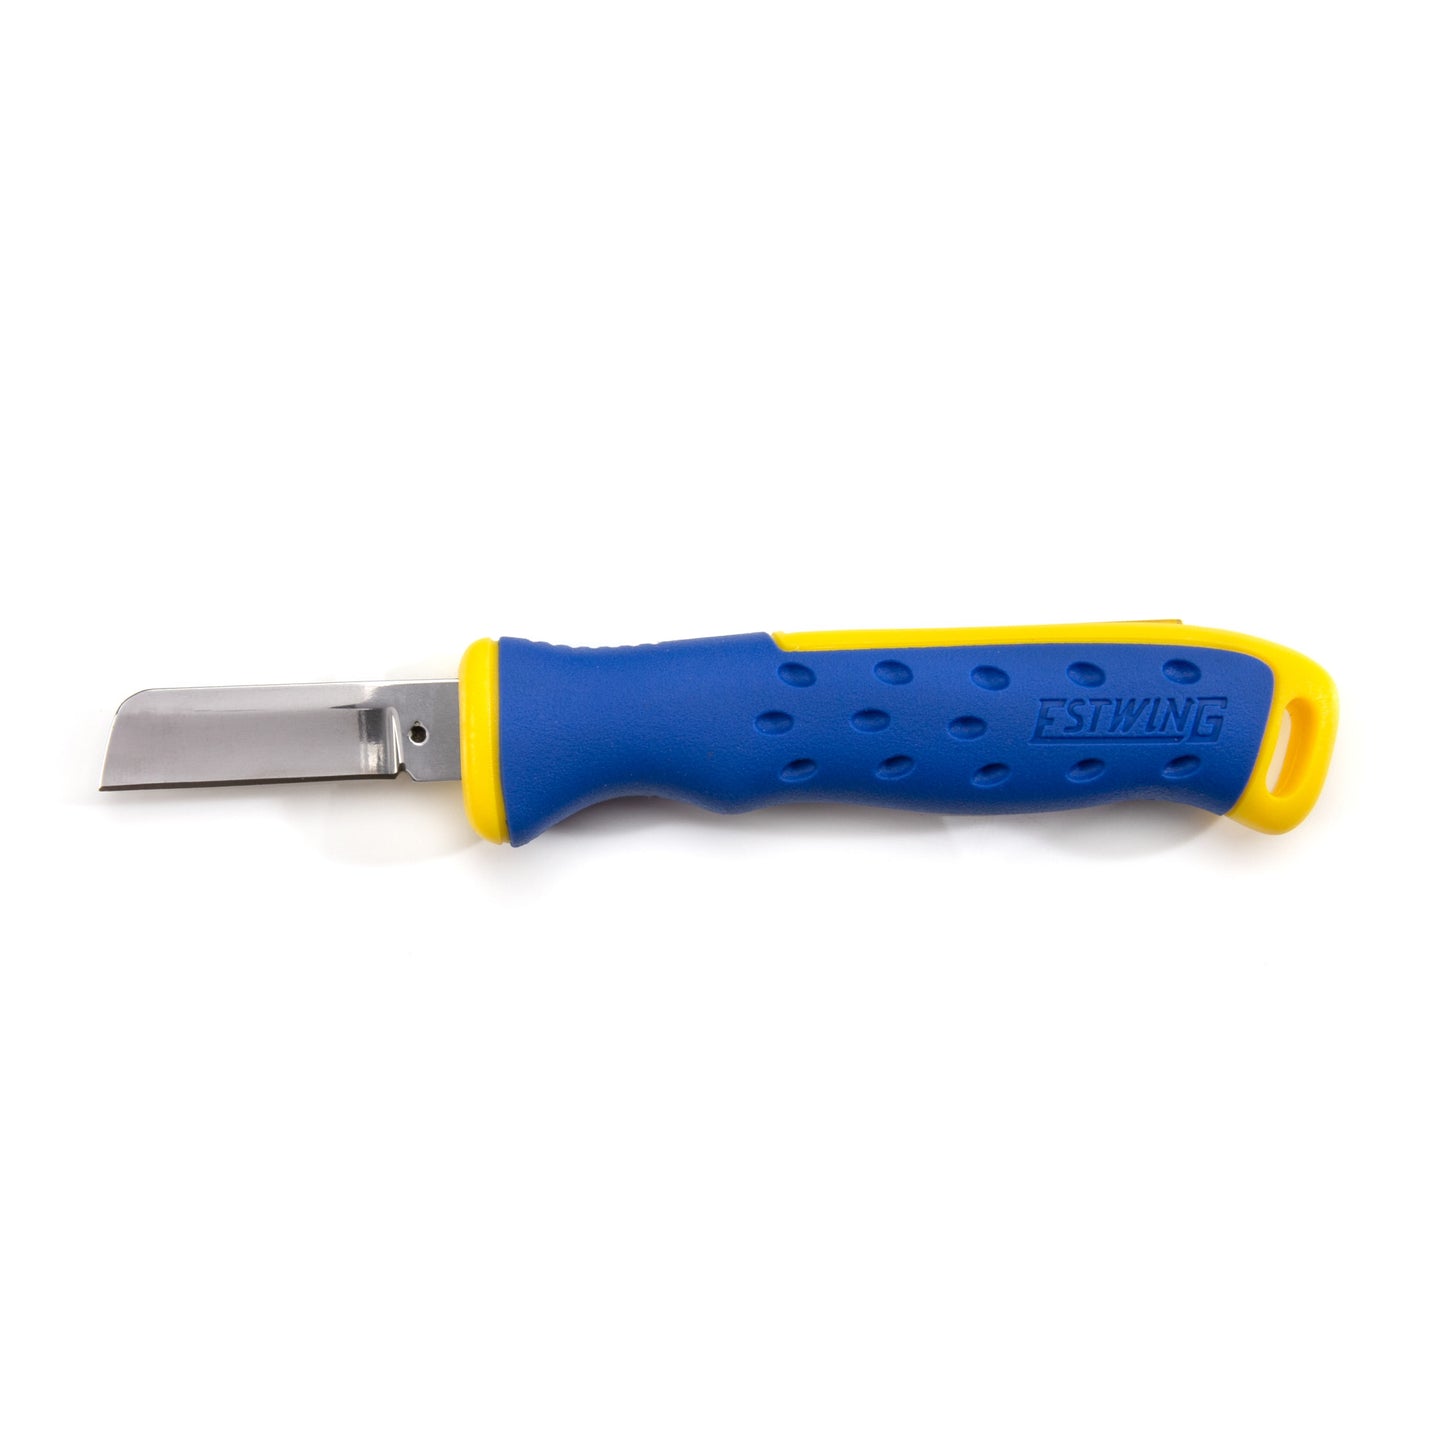 1.8-Inch Sheepsfoot Tip Cable Splicing Knife with In-Handle Blade Cover Storage